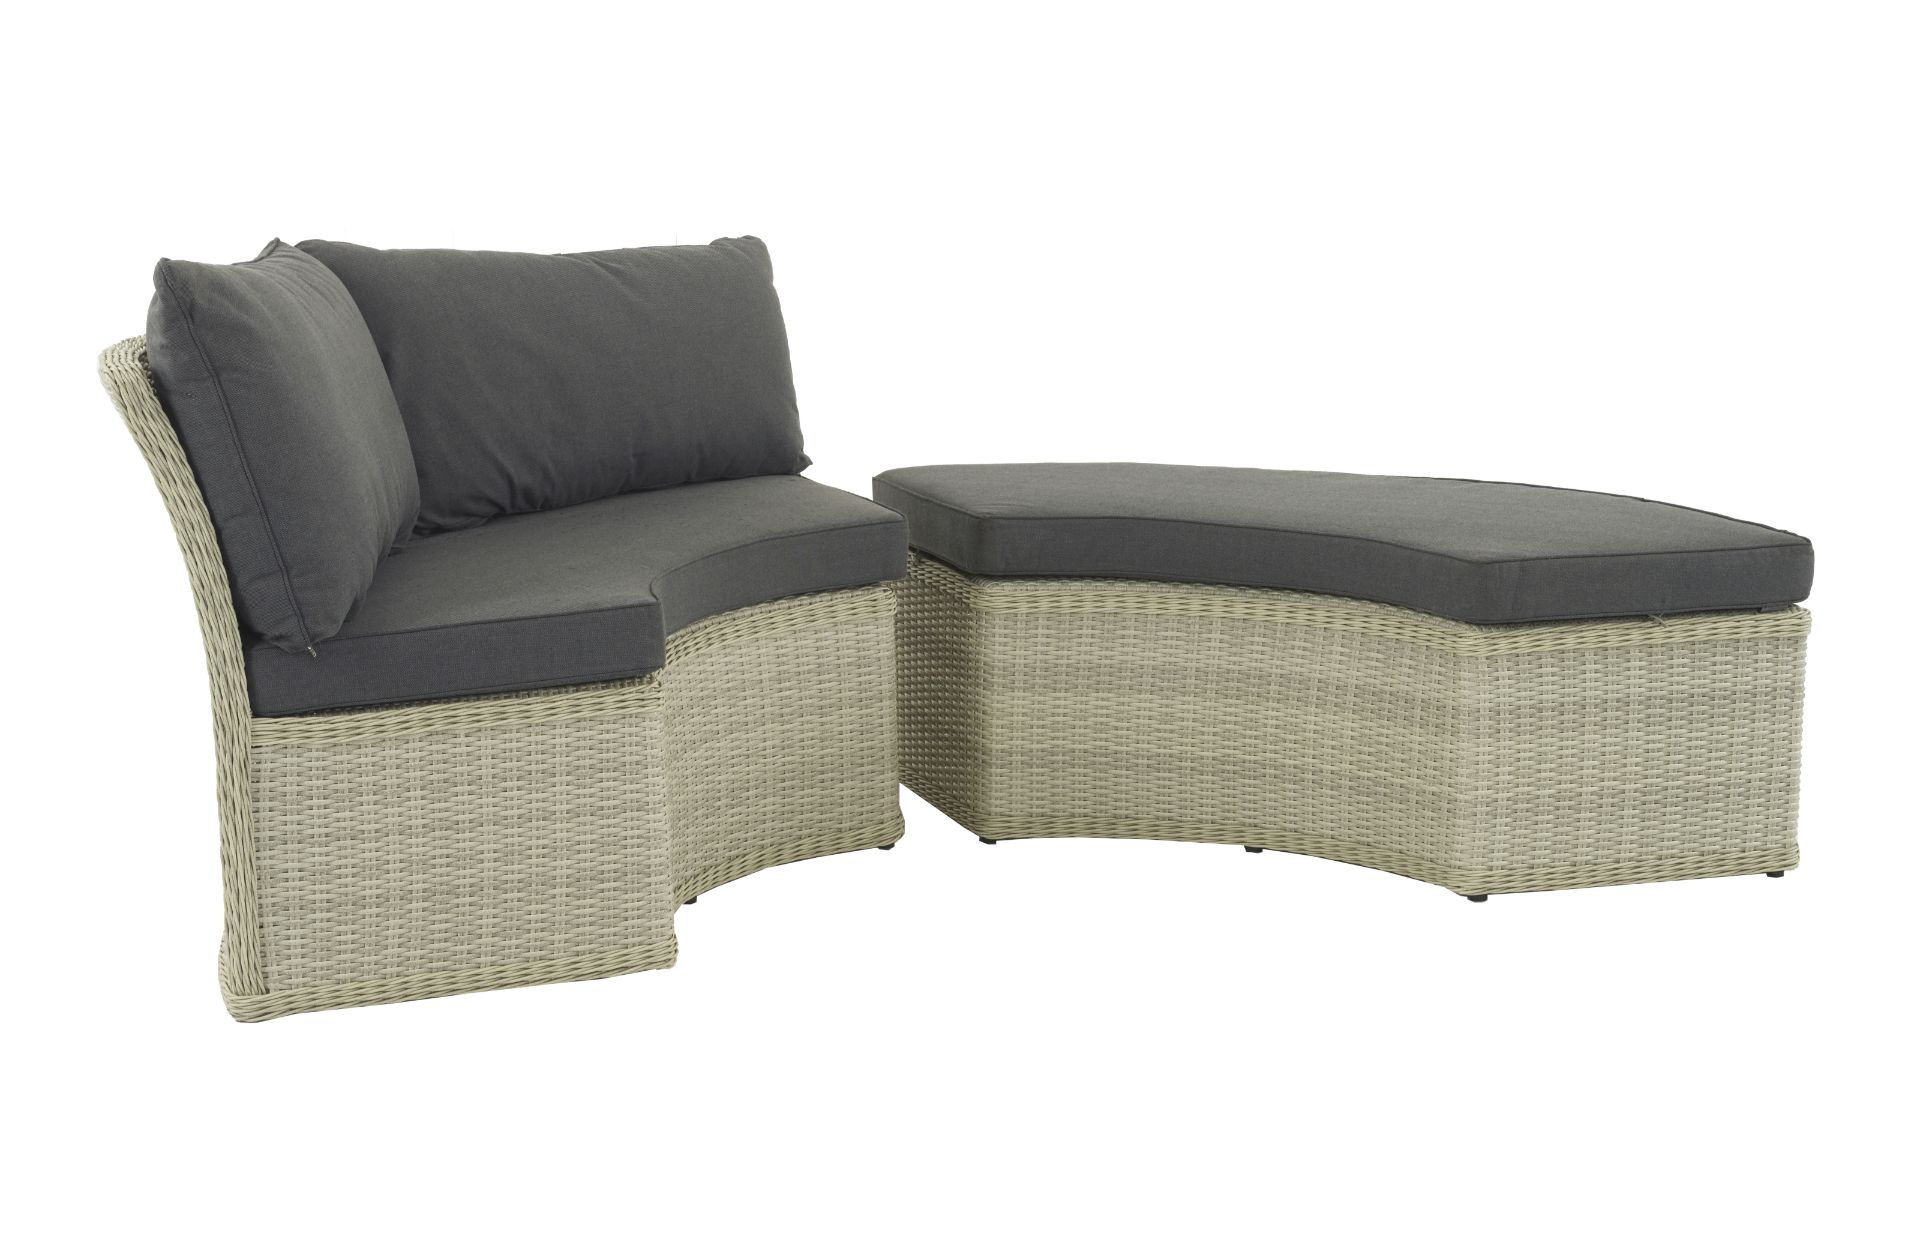 Set A507 Monterey Curved Sofa & Bench - Right (Dove Grey)